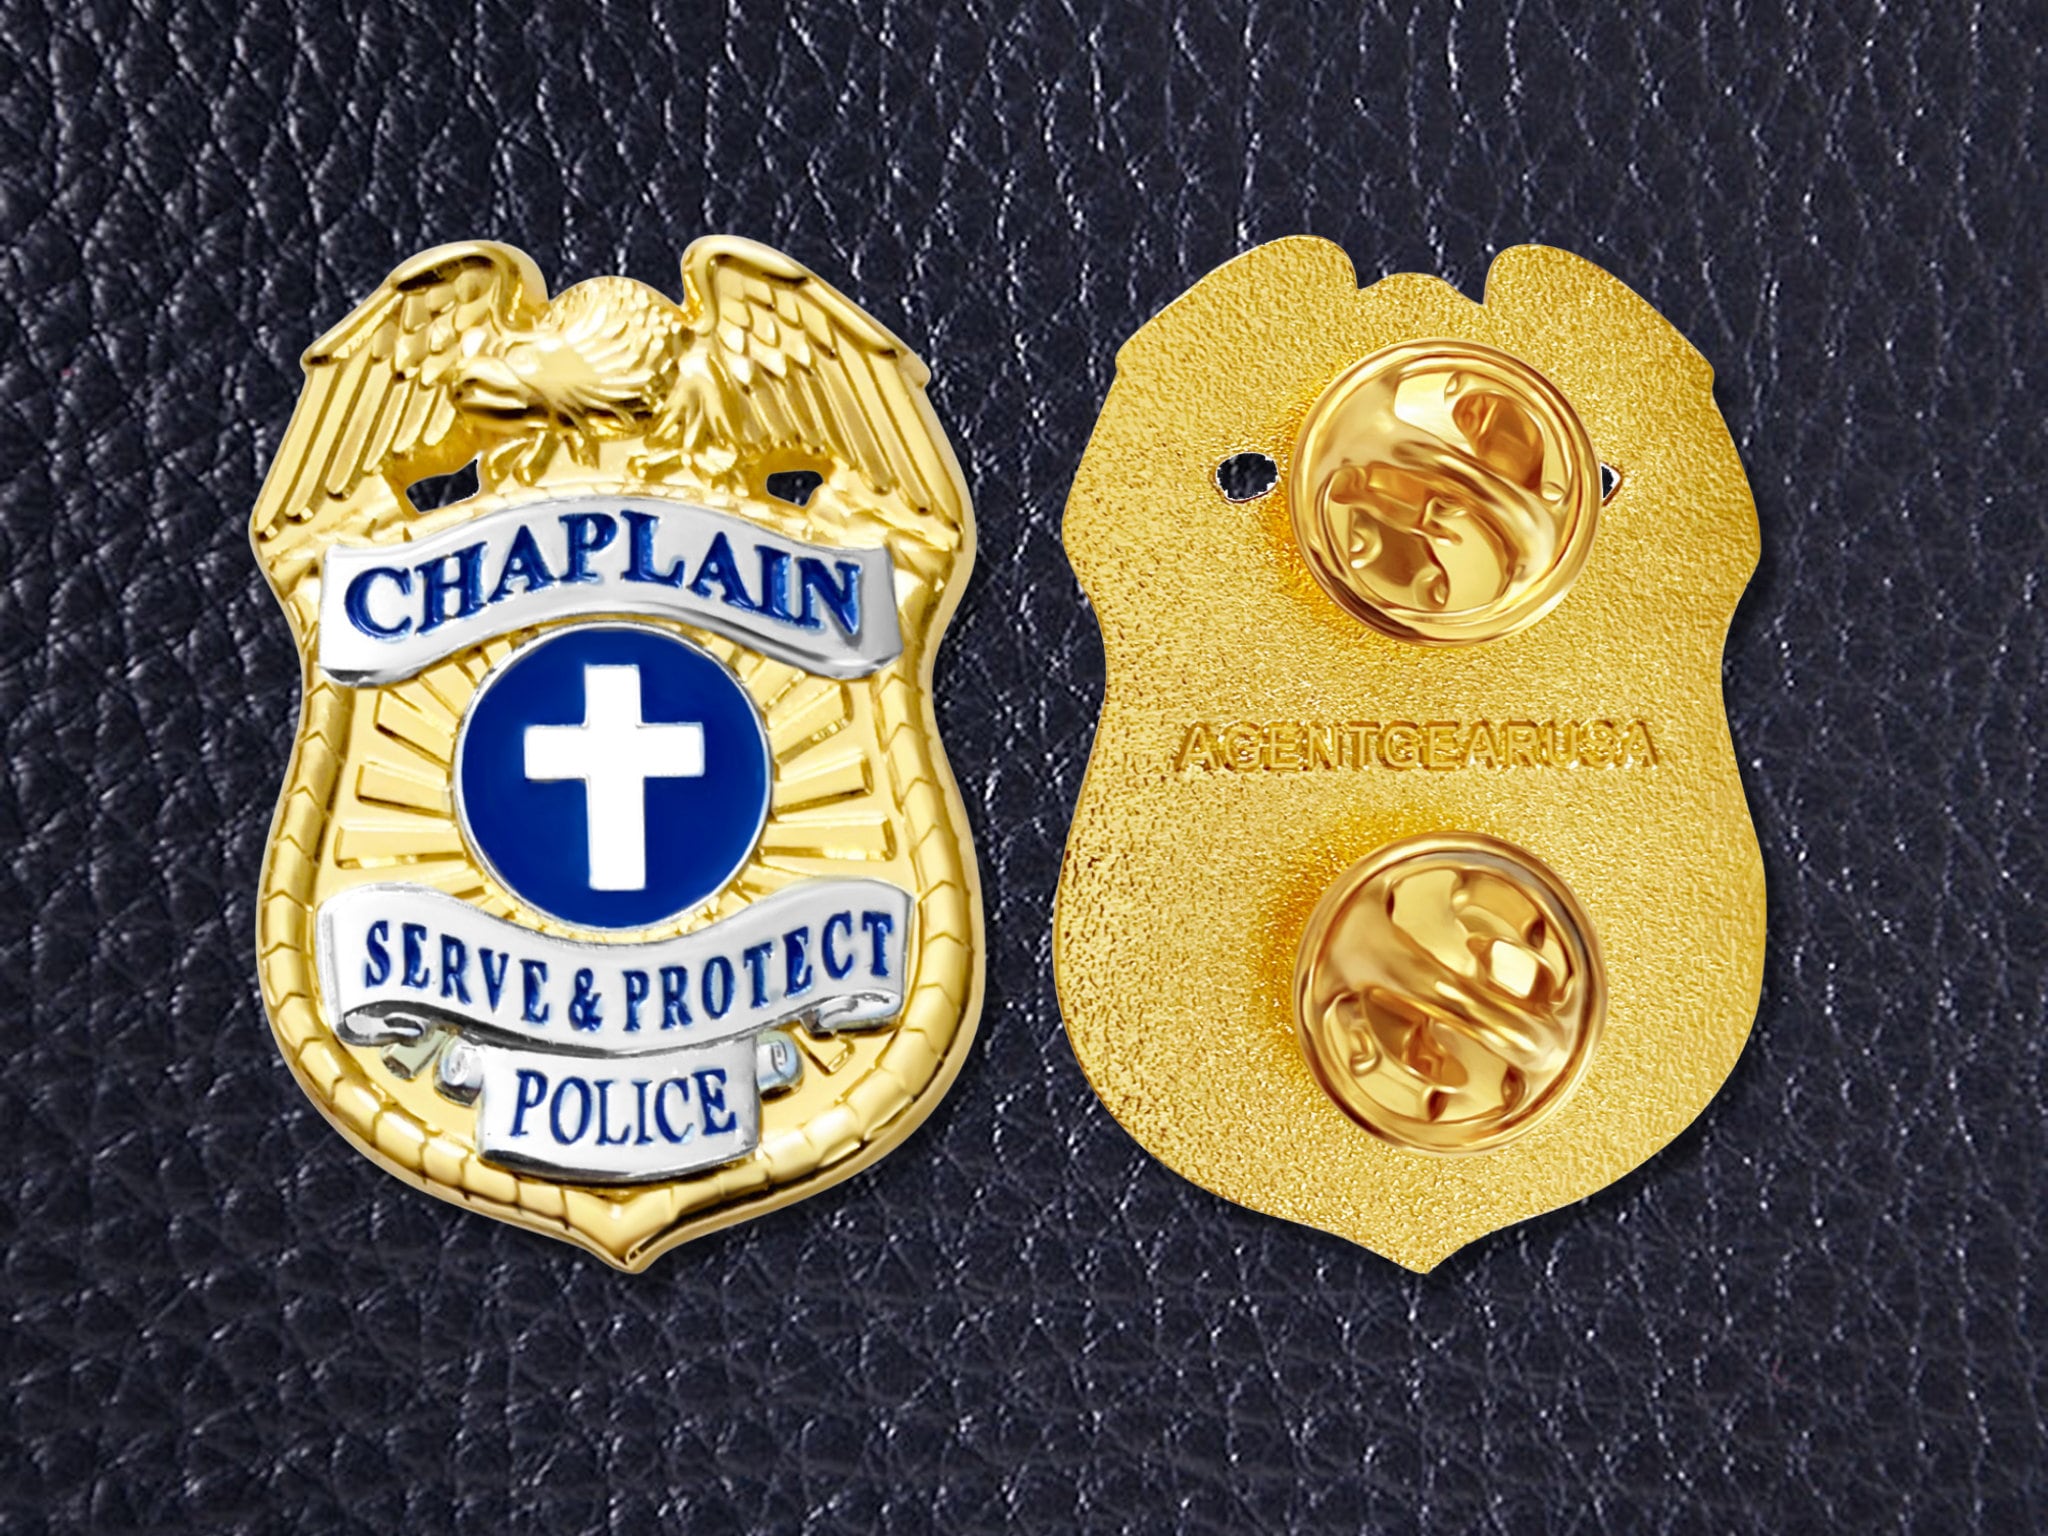 Chaplain Police Badge with (Black or Brown) leather belt clip holder